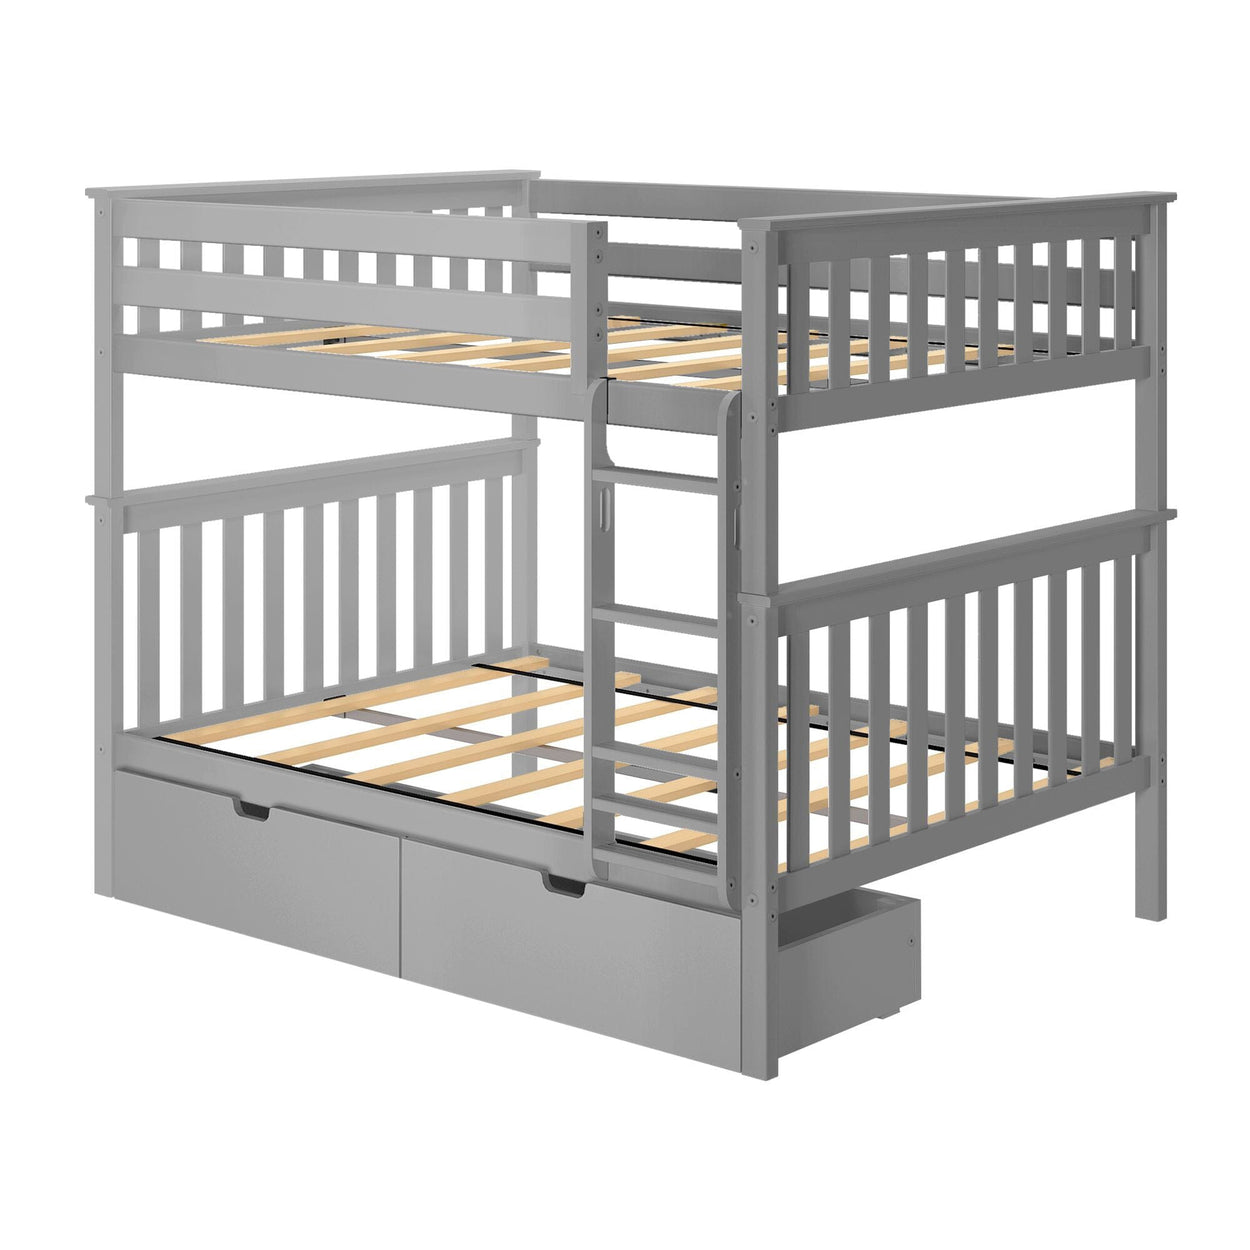 187251-121 : Bunk Beds Full Over Full Bunk Bed With Storage Drawers, Grey